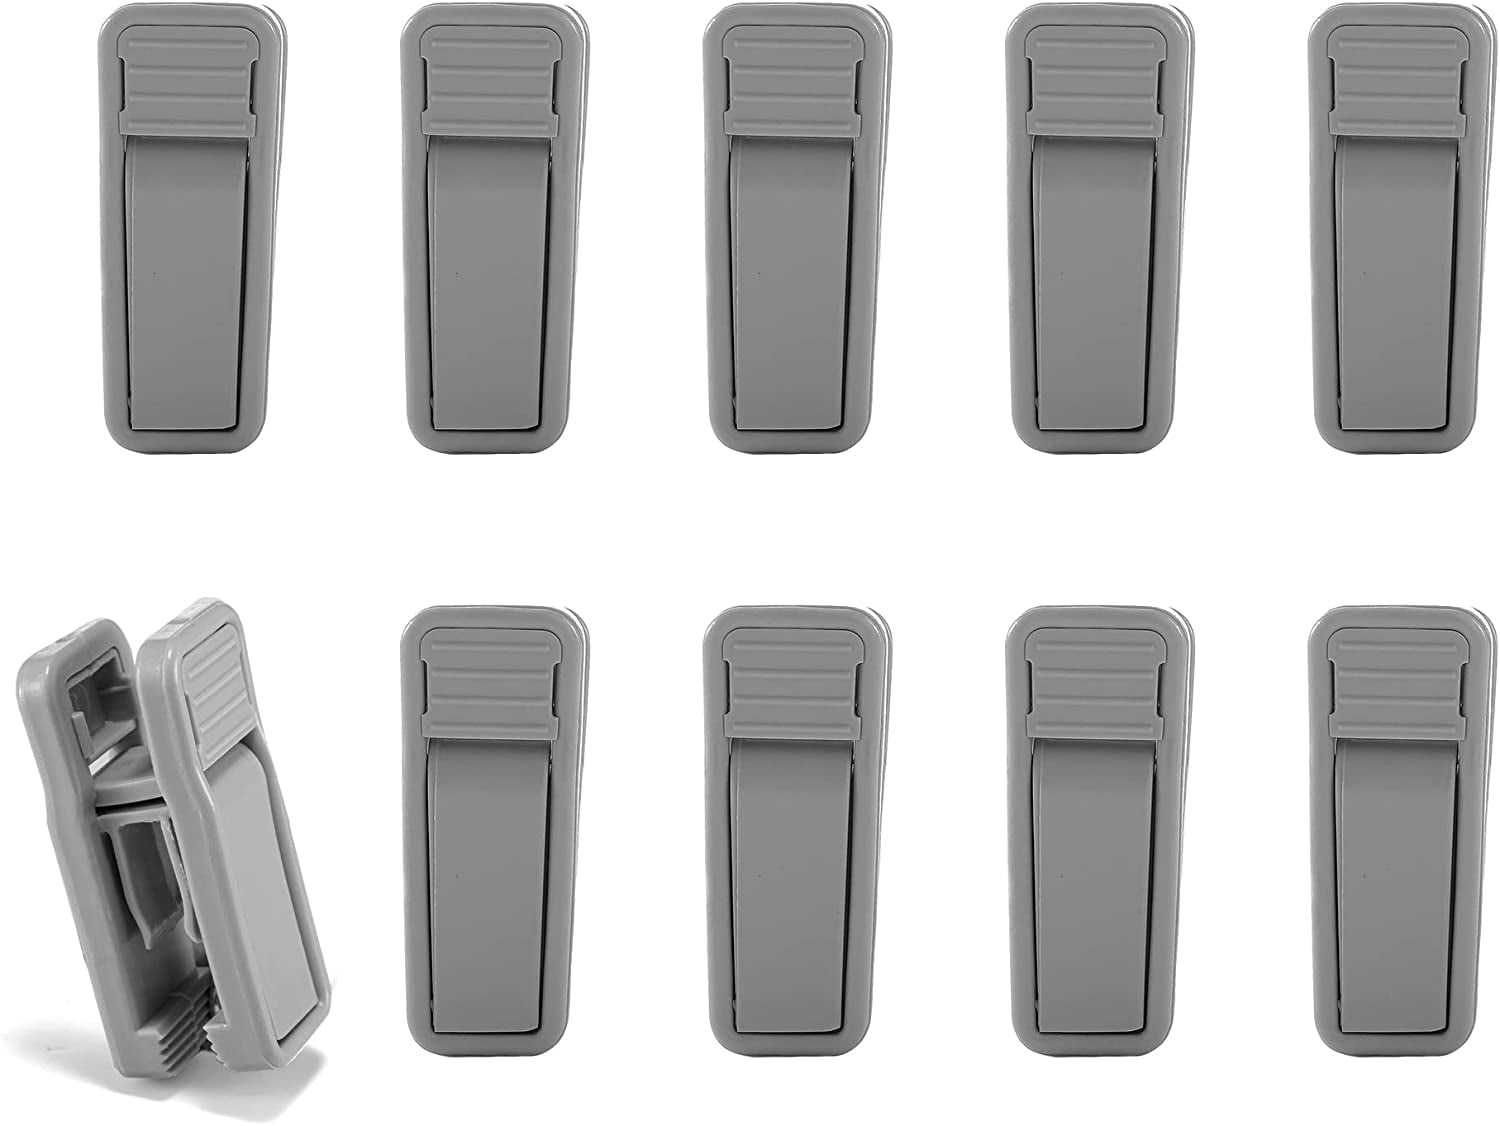 HOUSE DAY Grey Plastic Finger Clips for Hangers, 100 Pack Pants Hanger Clips,  Strong Pinch Grip Clips for Use with Slim-line Clothes Hangers, Clips for  Velvet Hangers - Yahoo Shopping